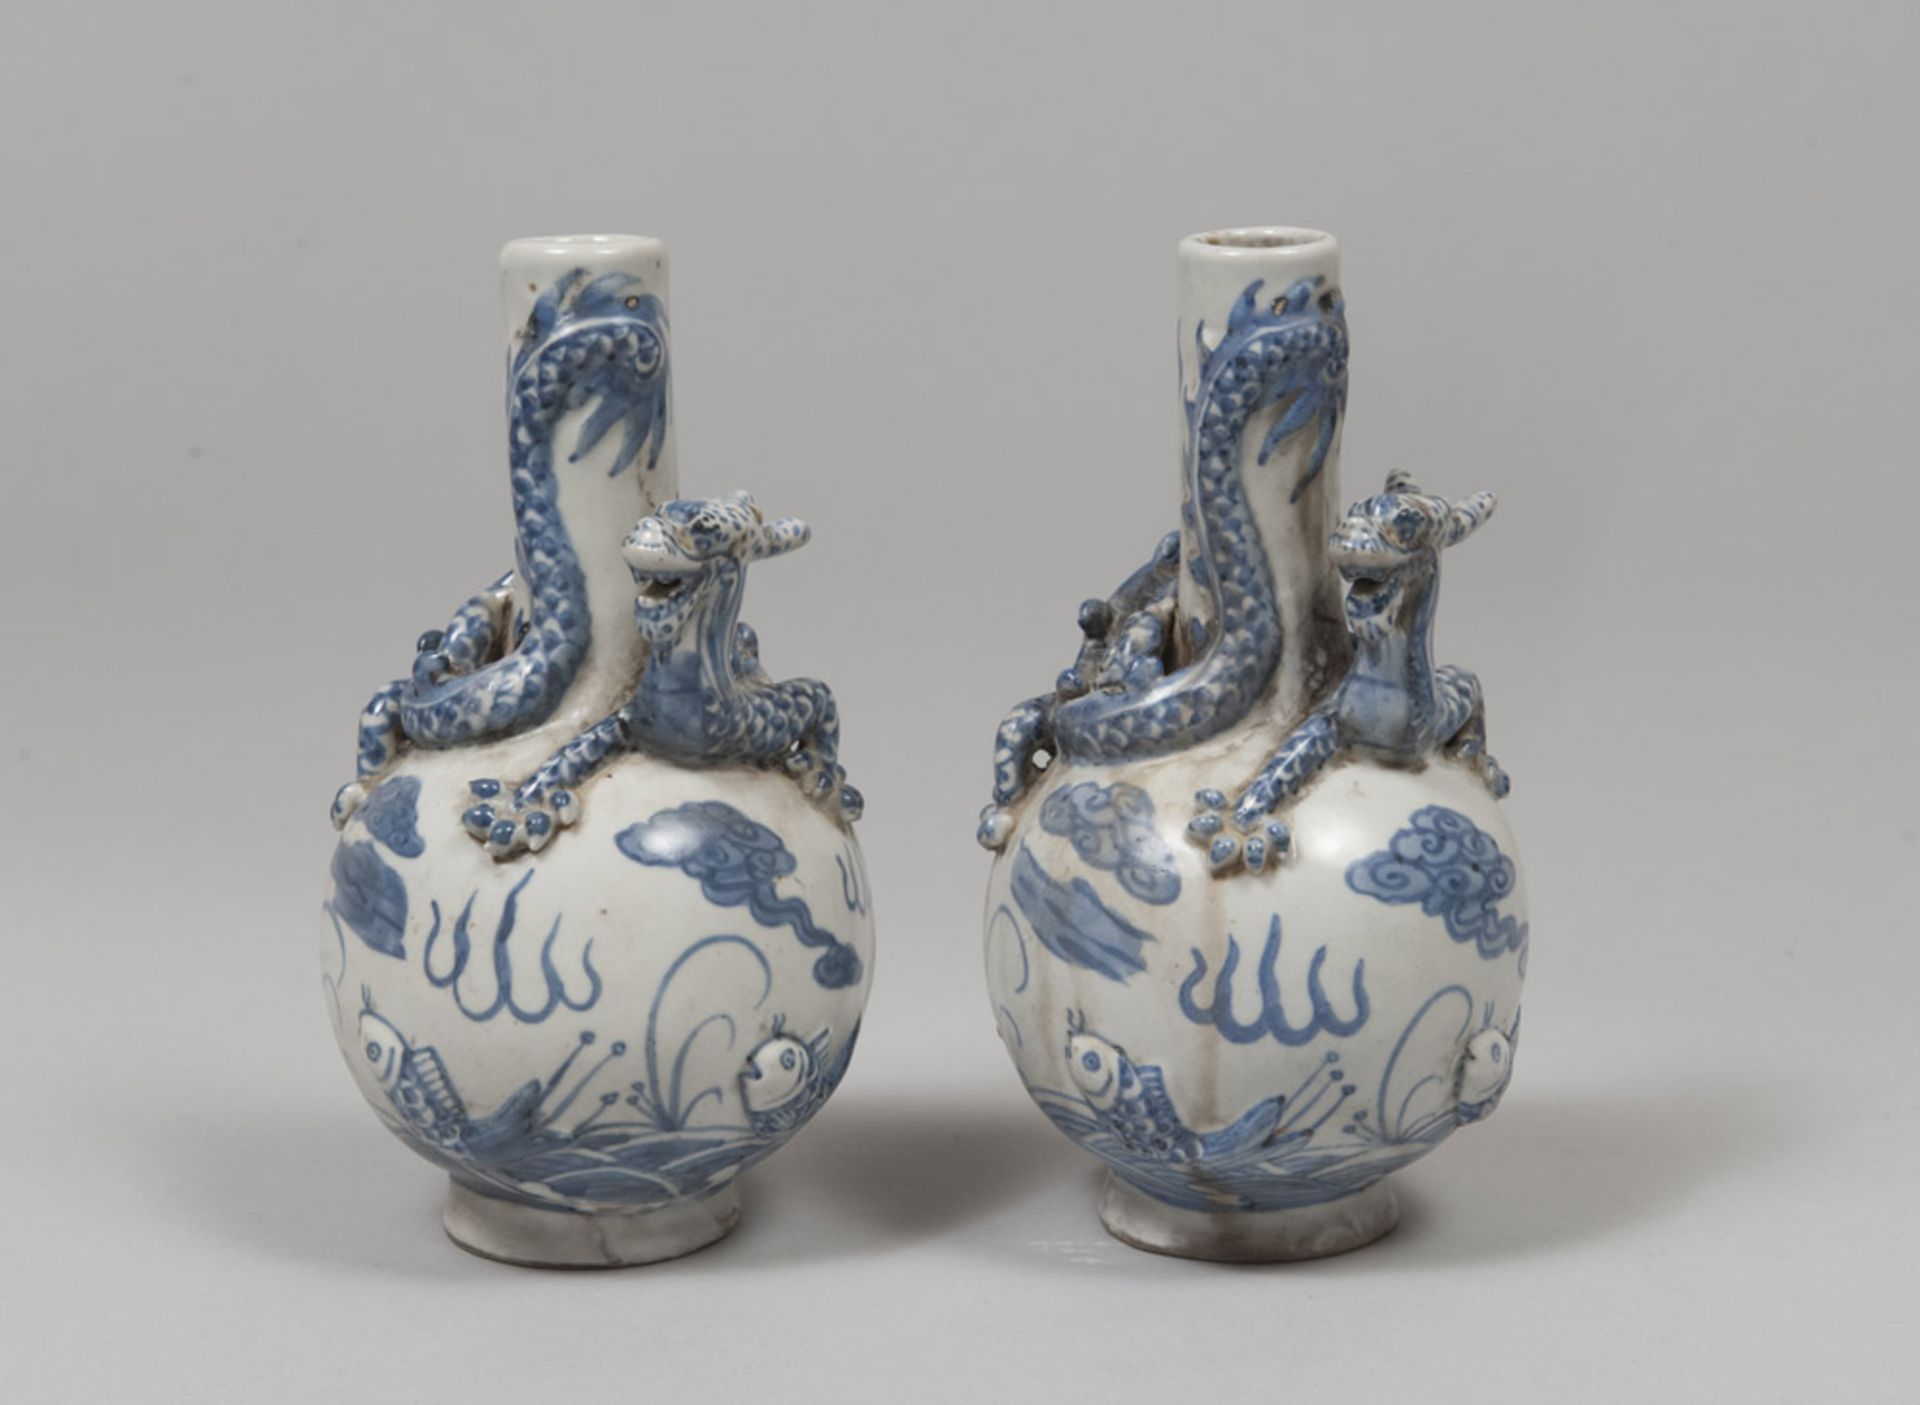 A PAIR OF CHINESE WHITE AND BLUE PORCELAIN VASES, 20TH CENTURY